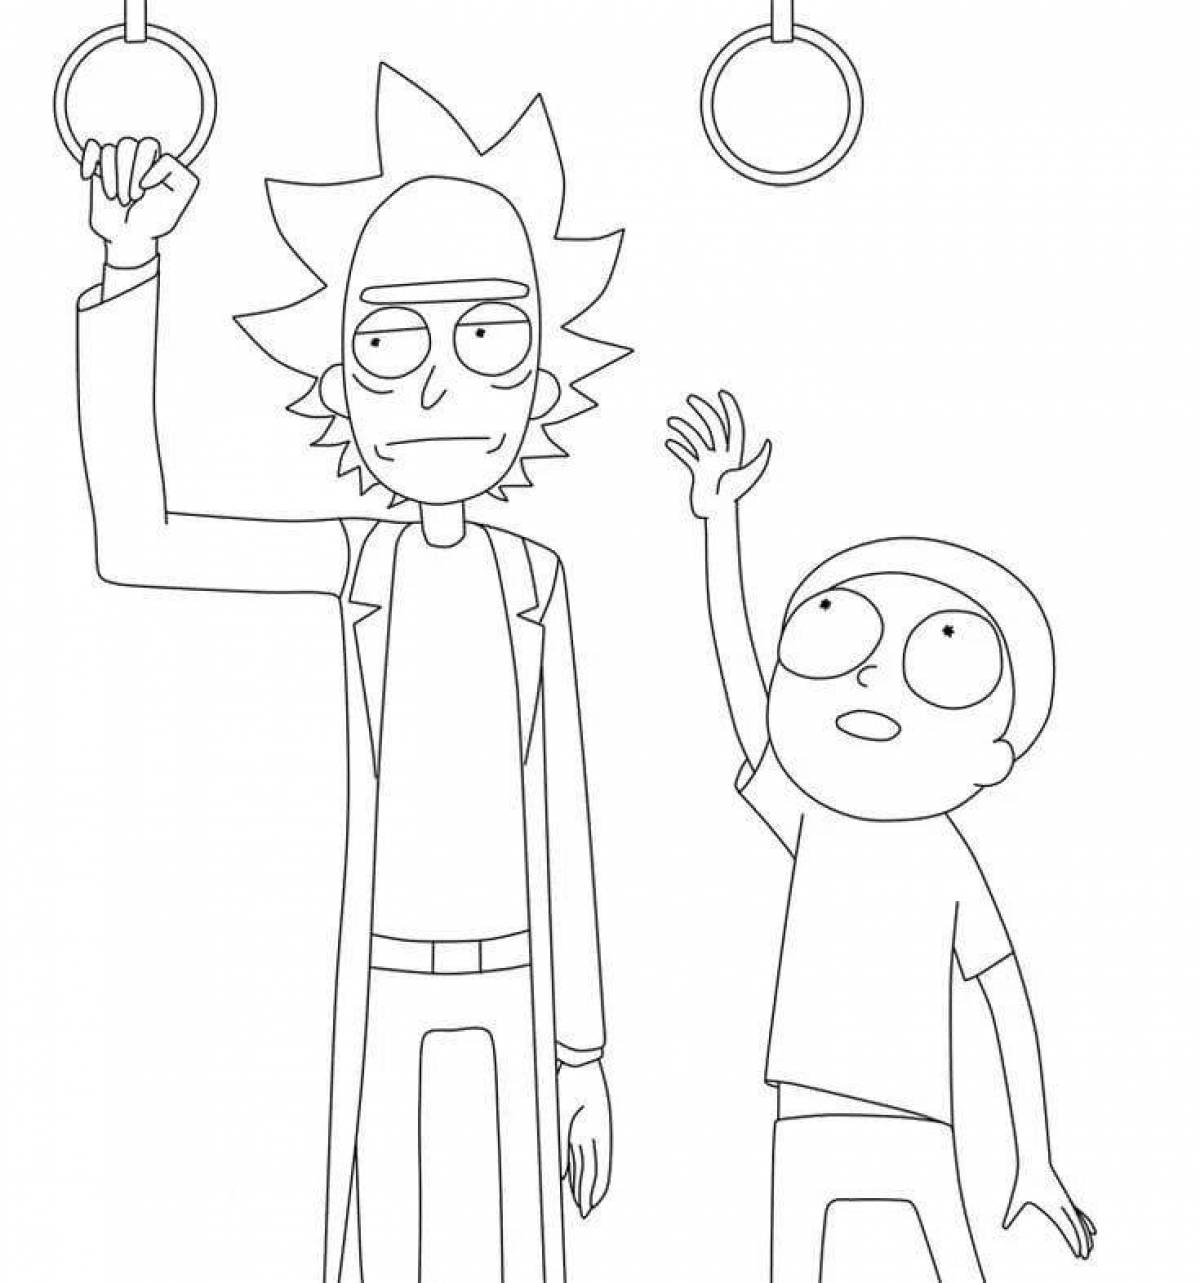 Large morty coloring page